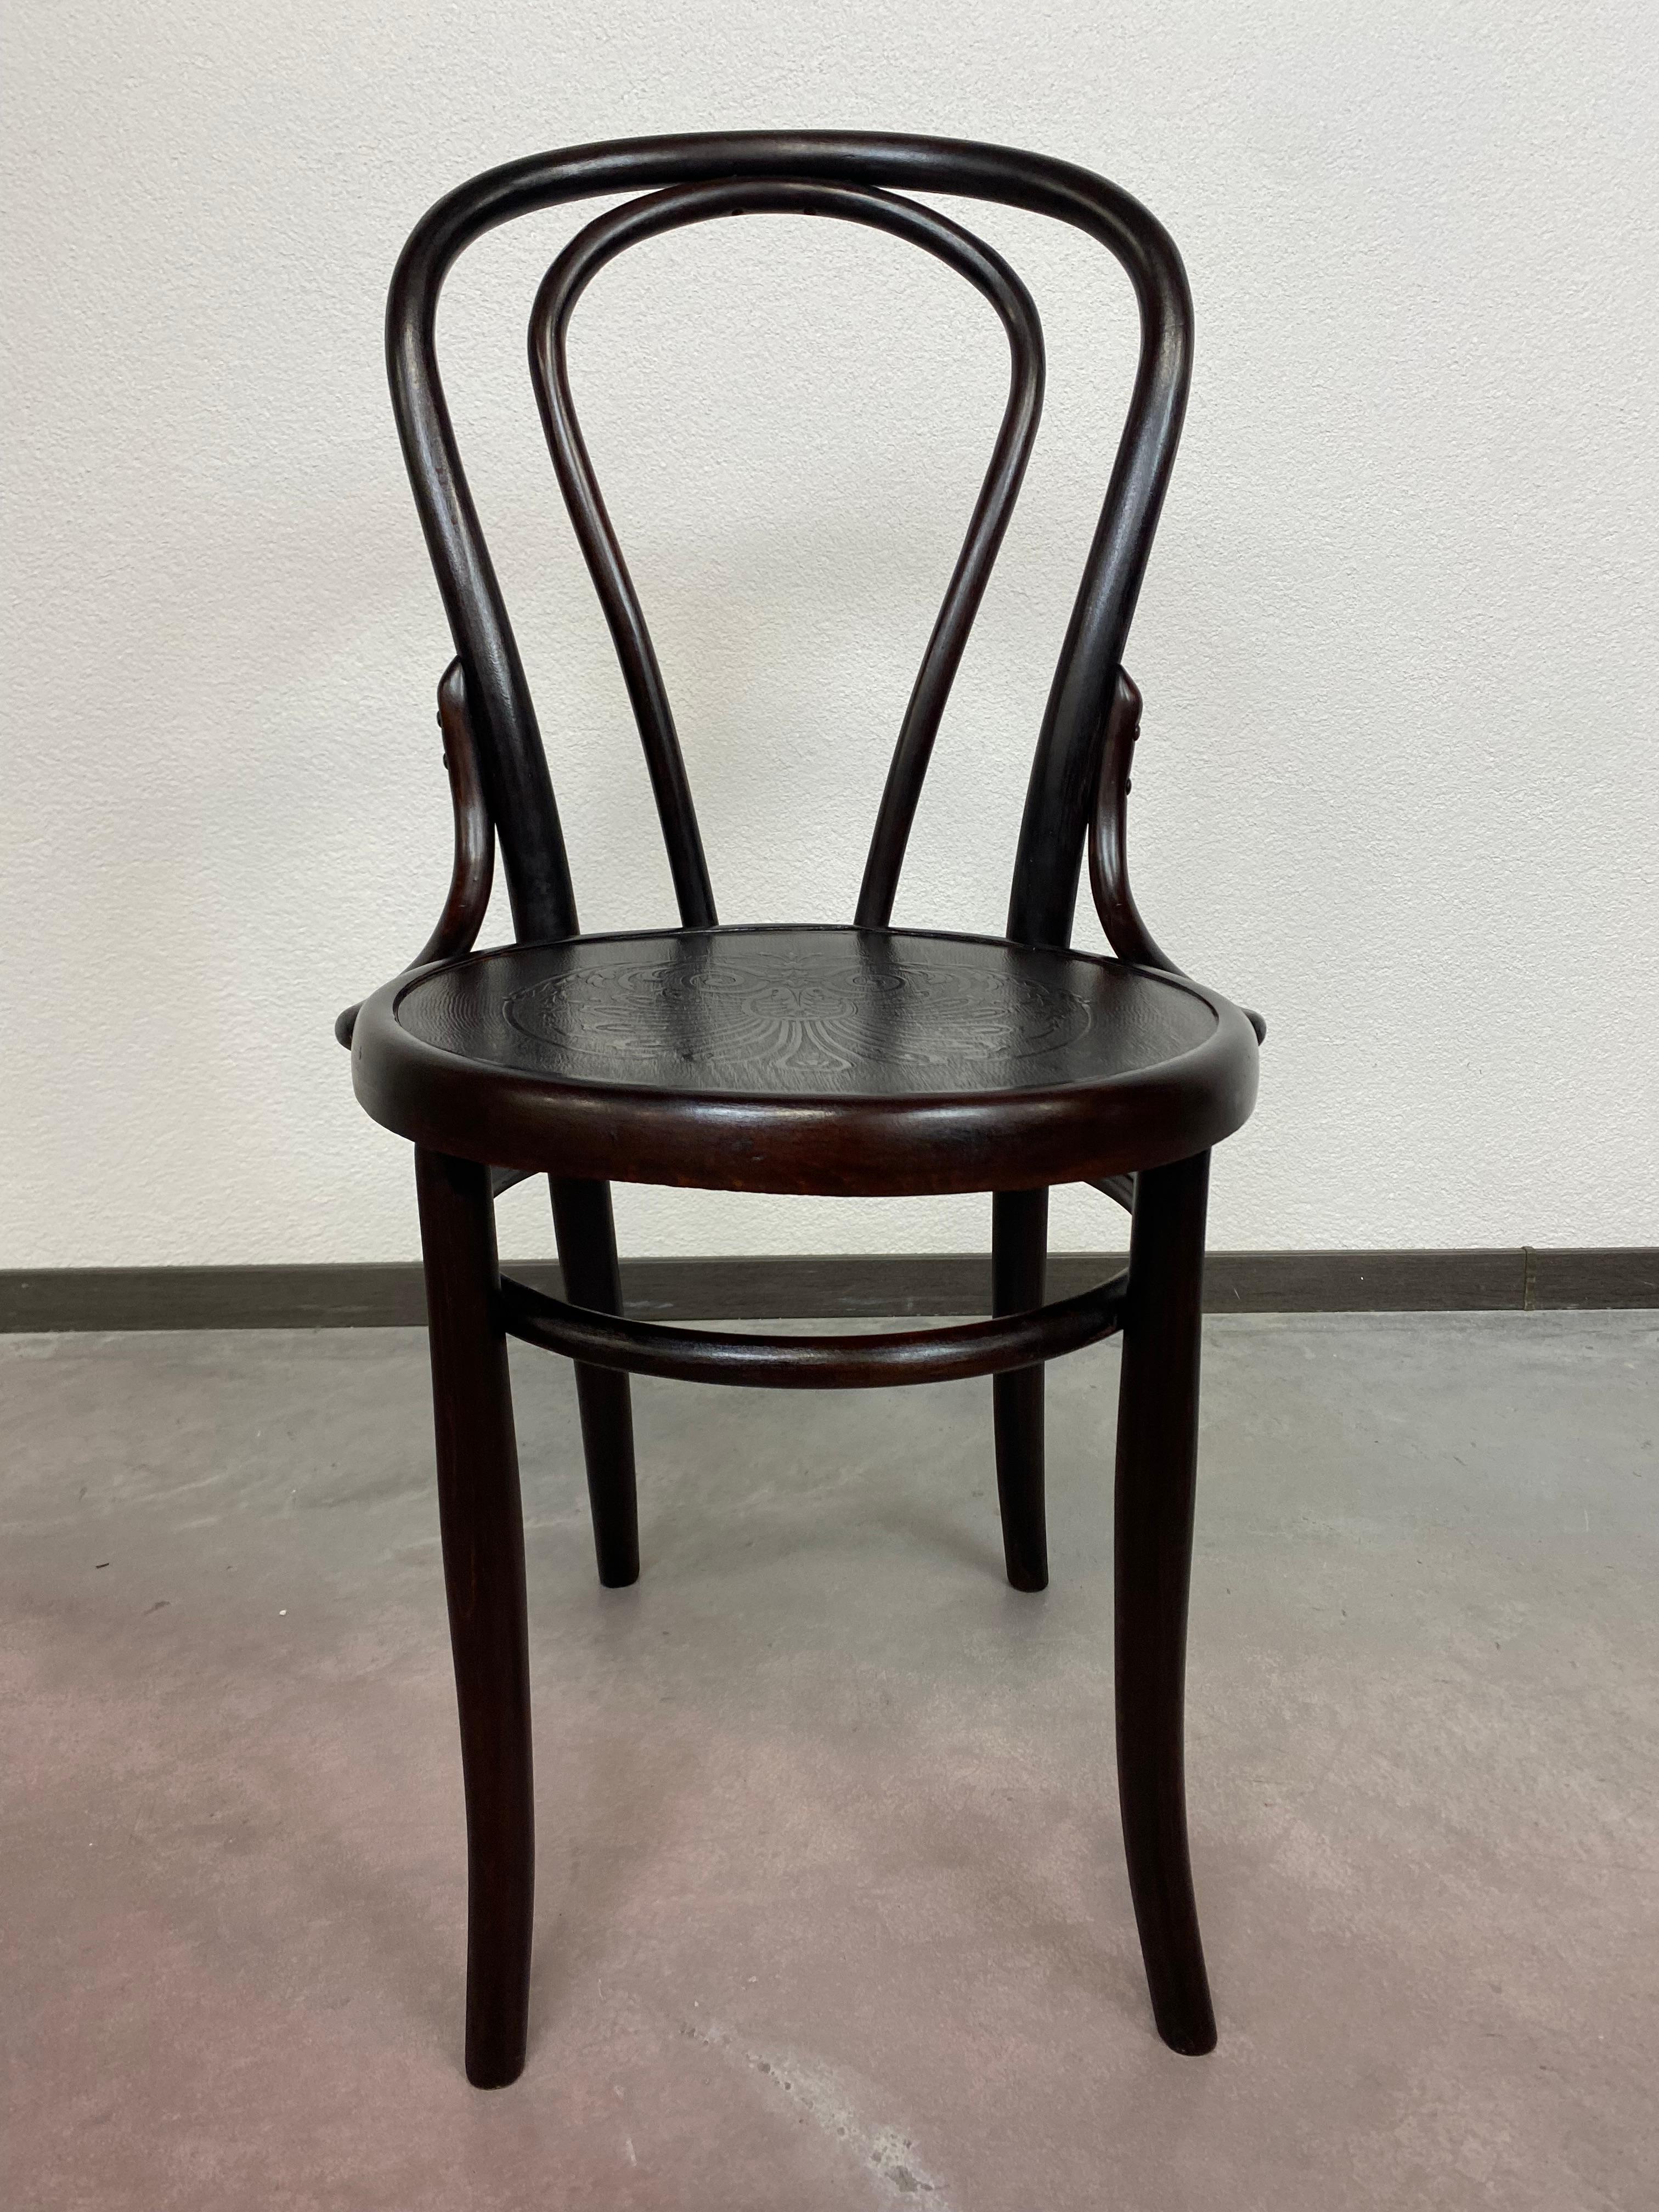 Thonet chair no.18 professionally stained and repolished.